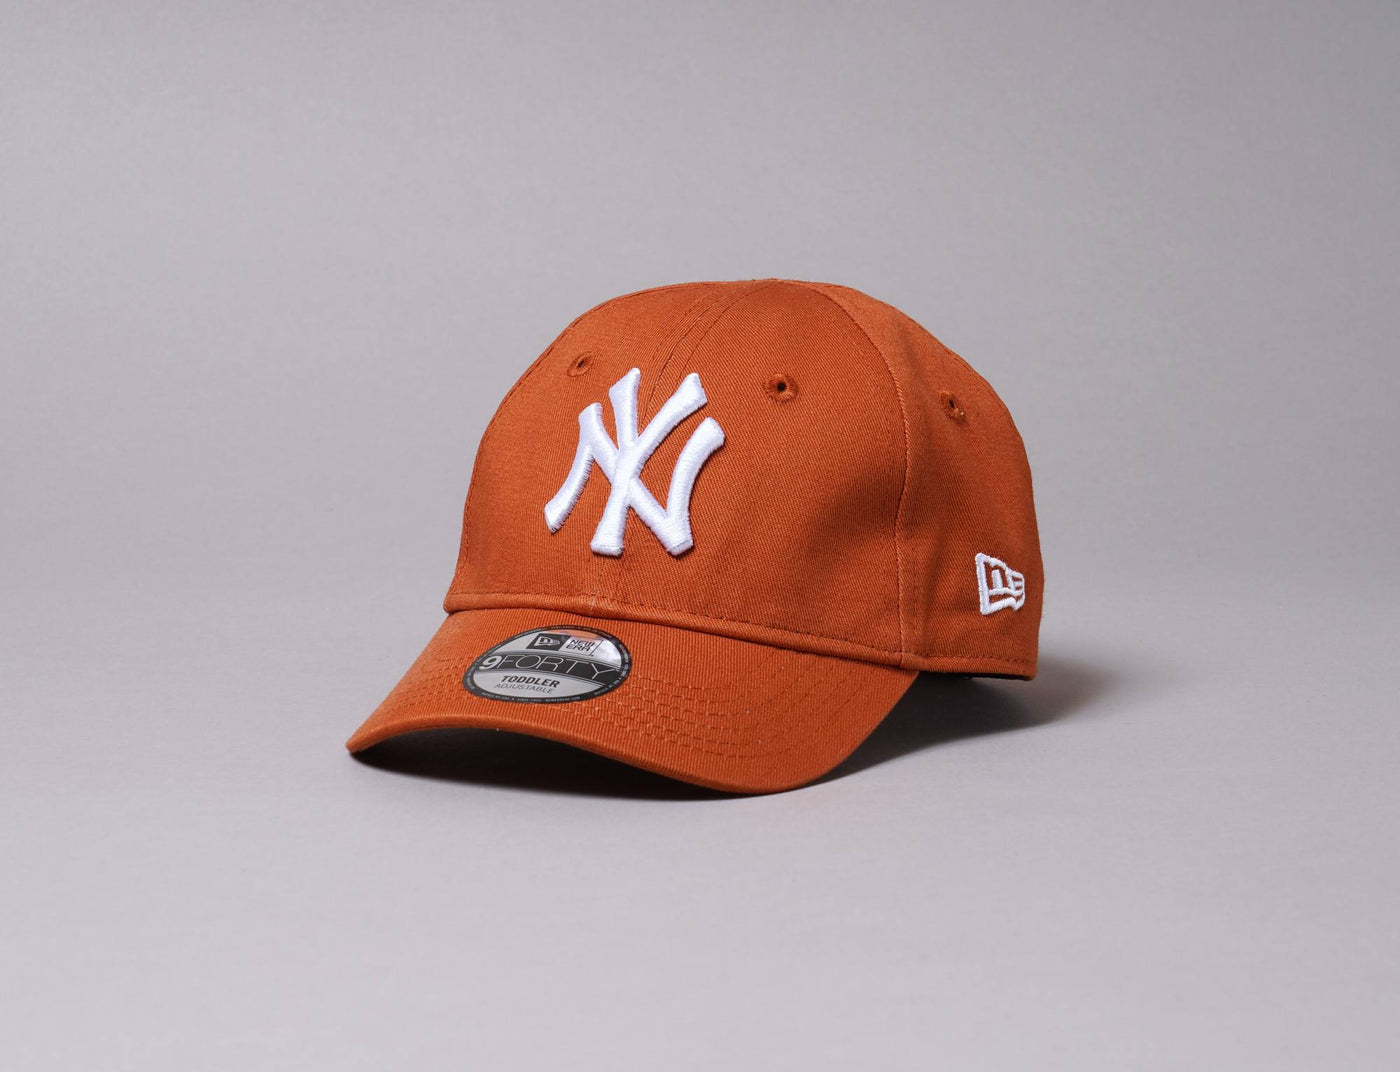 Cap Kids Barn 9FORTY Toddler League Essential NY Yankees Brown New Era 9FORTY Kids / Brown / One Size (55-60 cm)